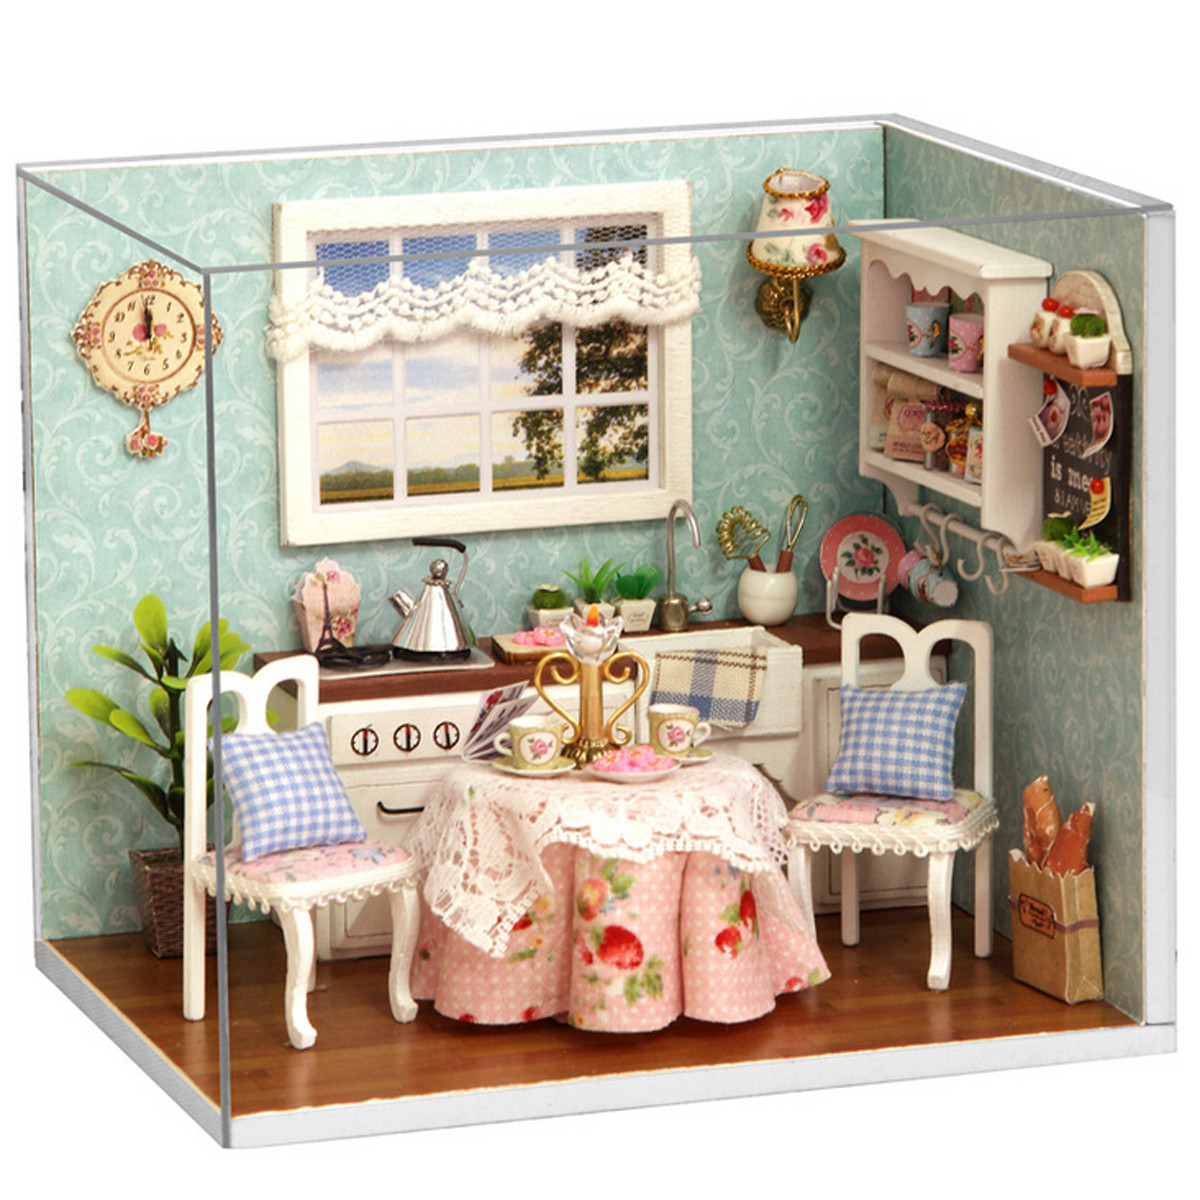 Cuteroom Dollhouse Miniature Dining Room DIY Kit With Cover And LED